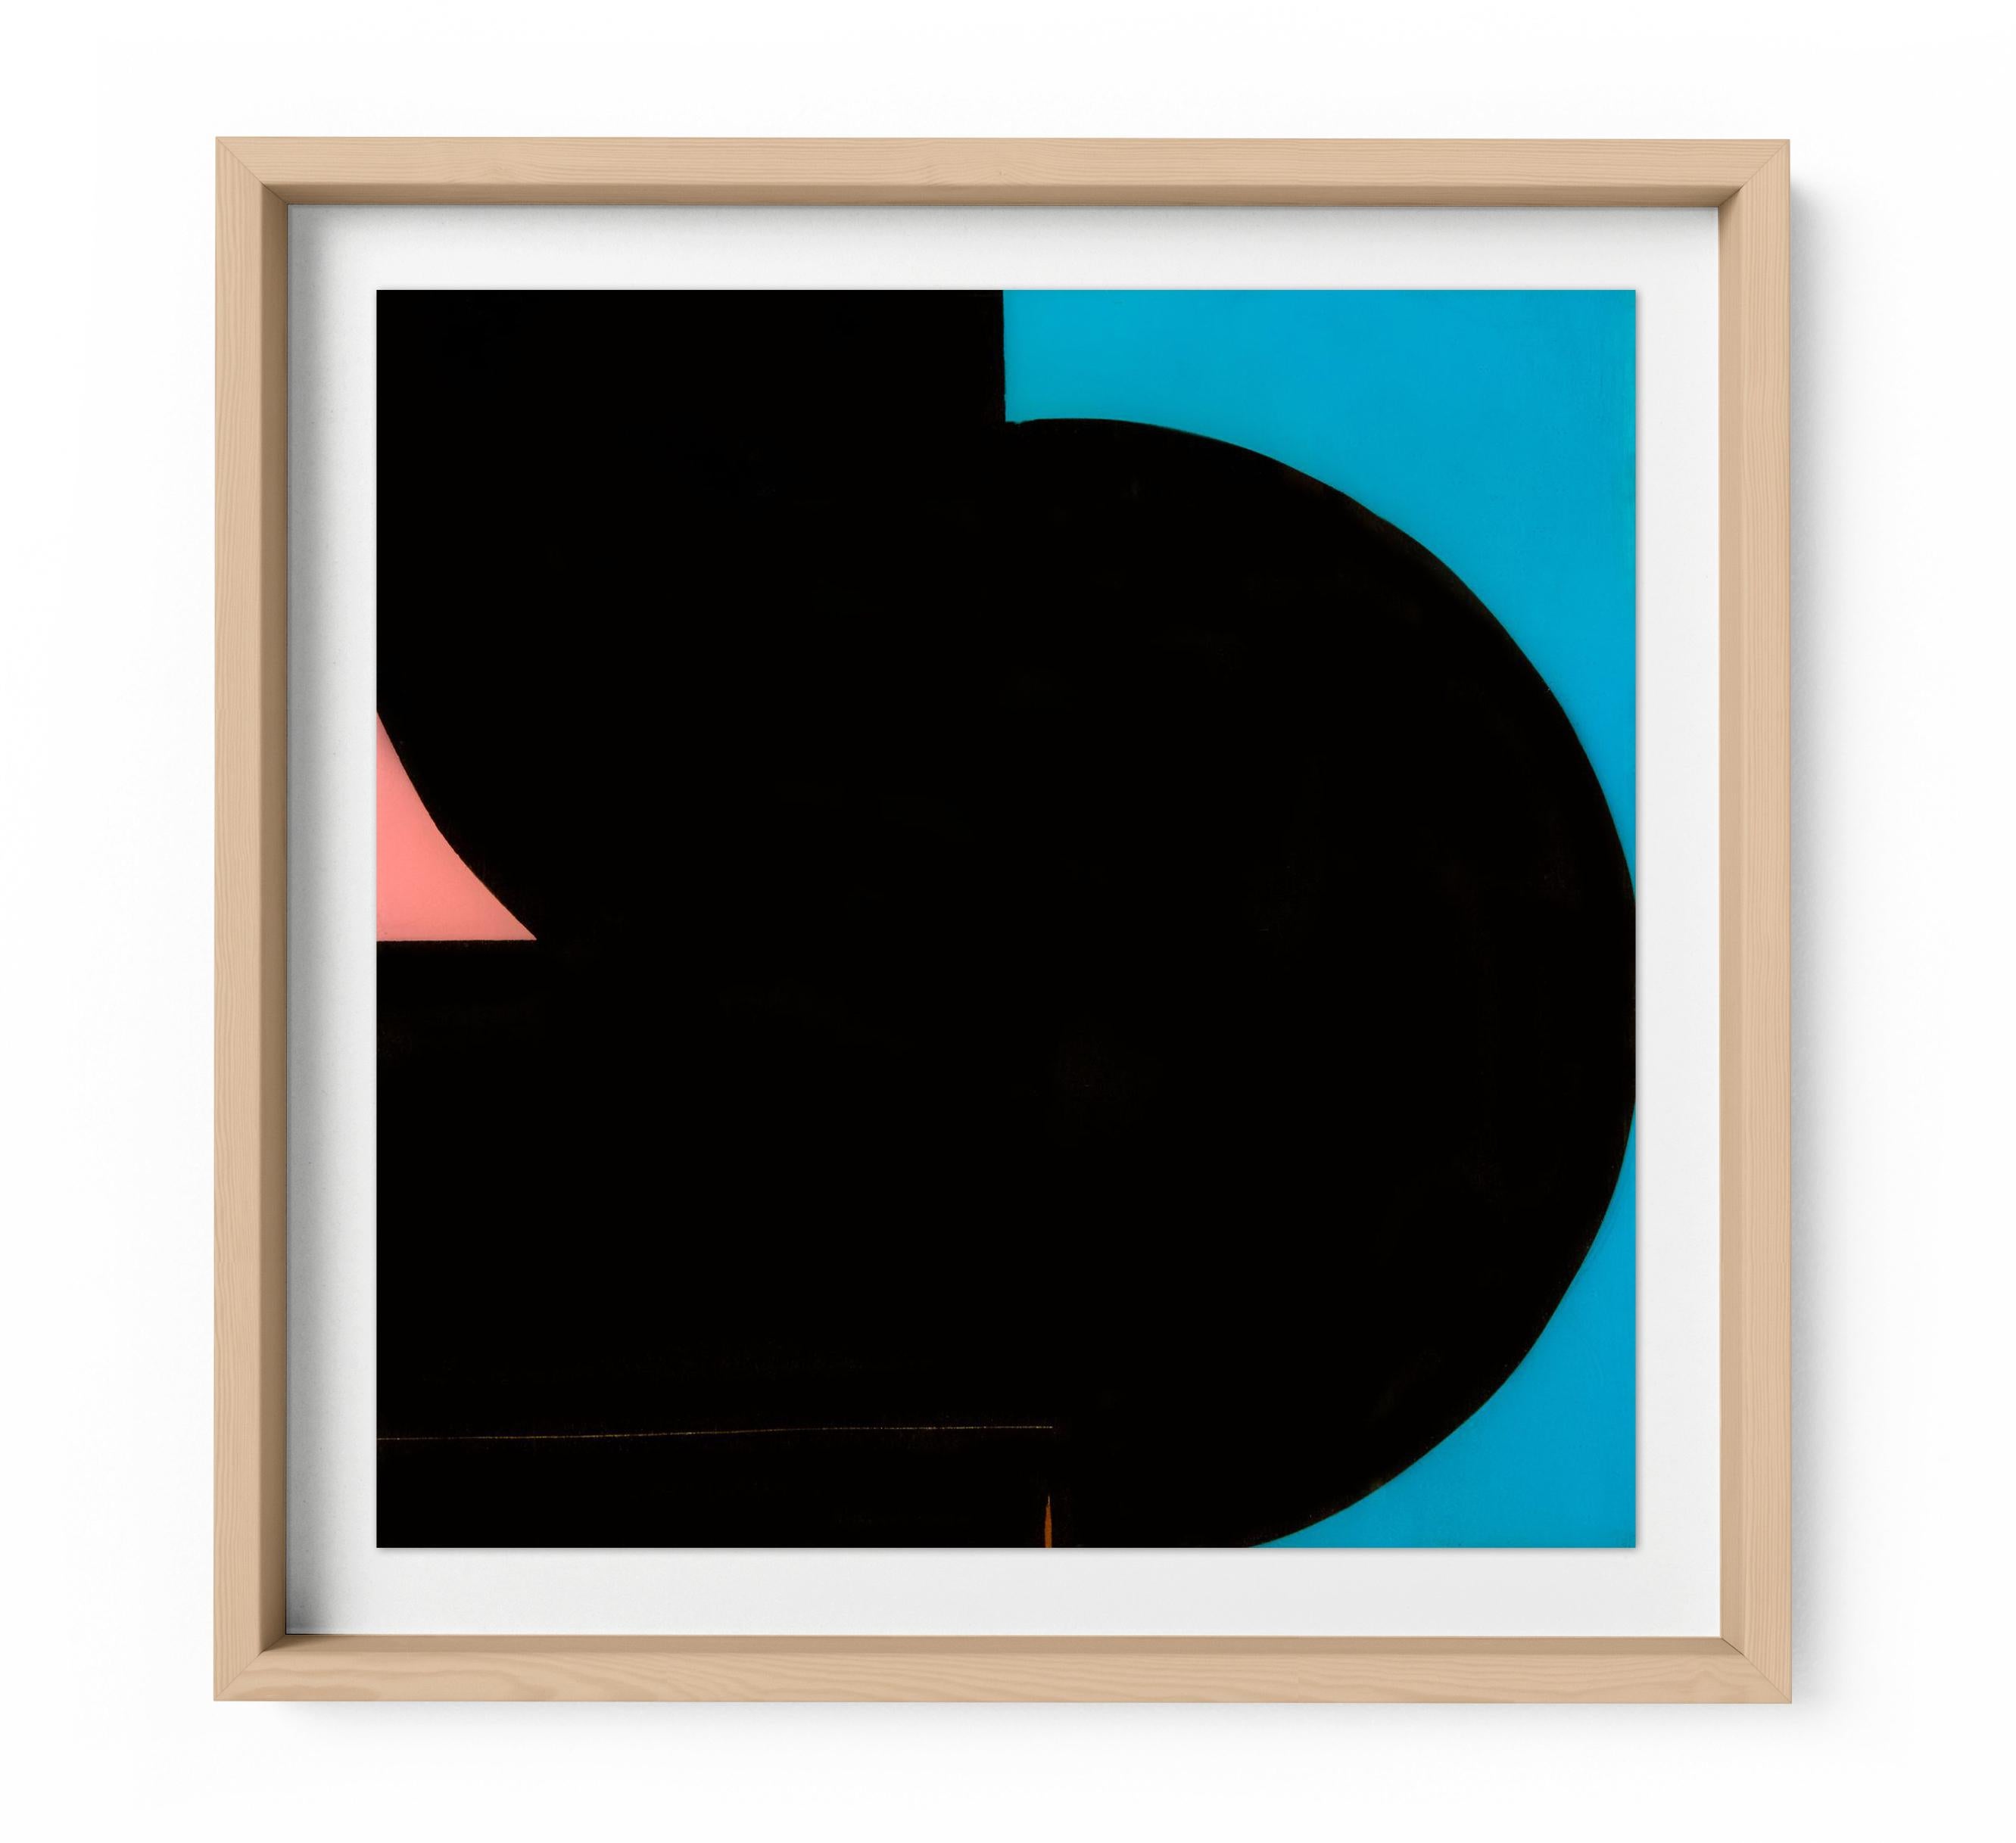 Baseline is a framed signed limited edition contemporary print by iconic Los Angeles-based visual artist and one of LA's original Graffiti artists Karlos Marquez. It features vibrant colors and abstract street art on high quality fine art paper.  